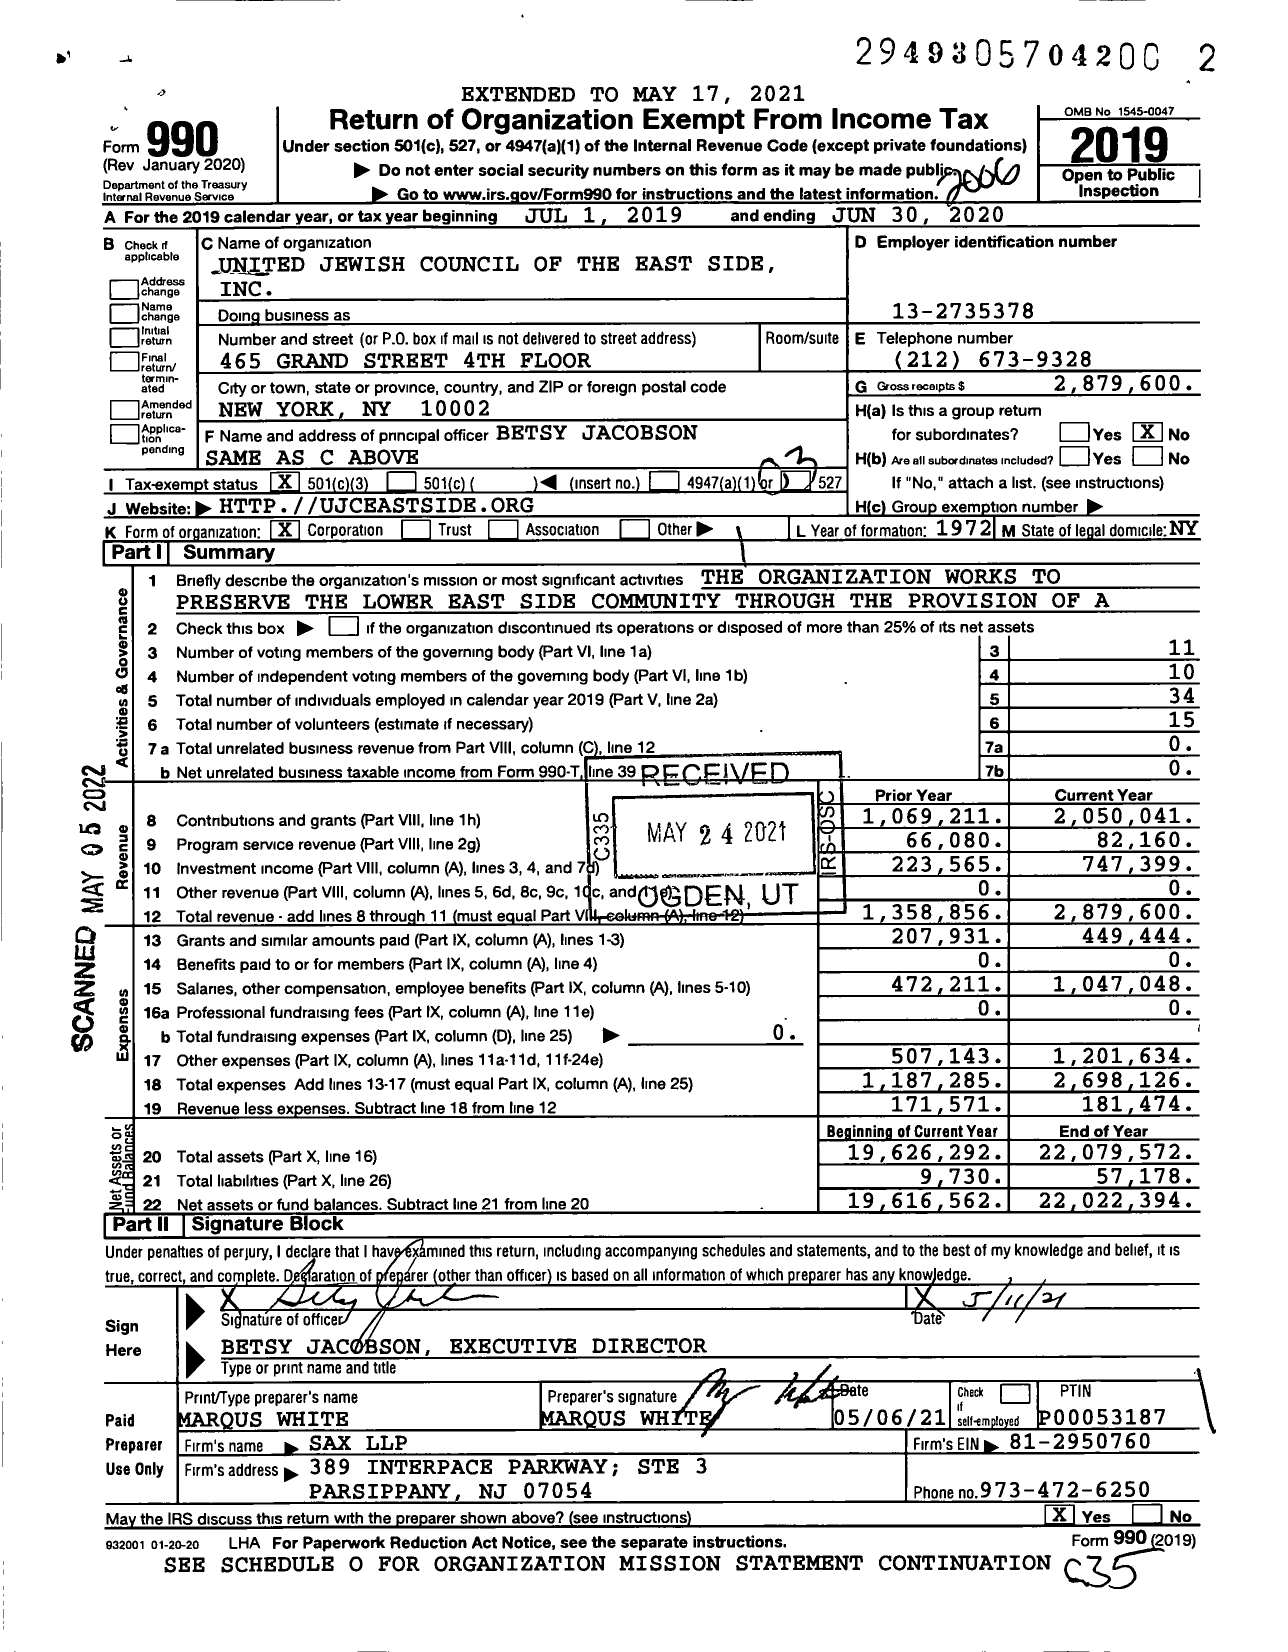 Image of first page of 2019 Form 990 for United Jewish Council of the East Side